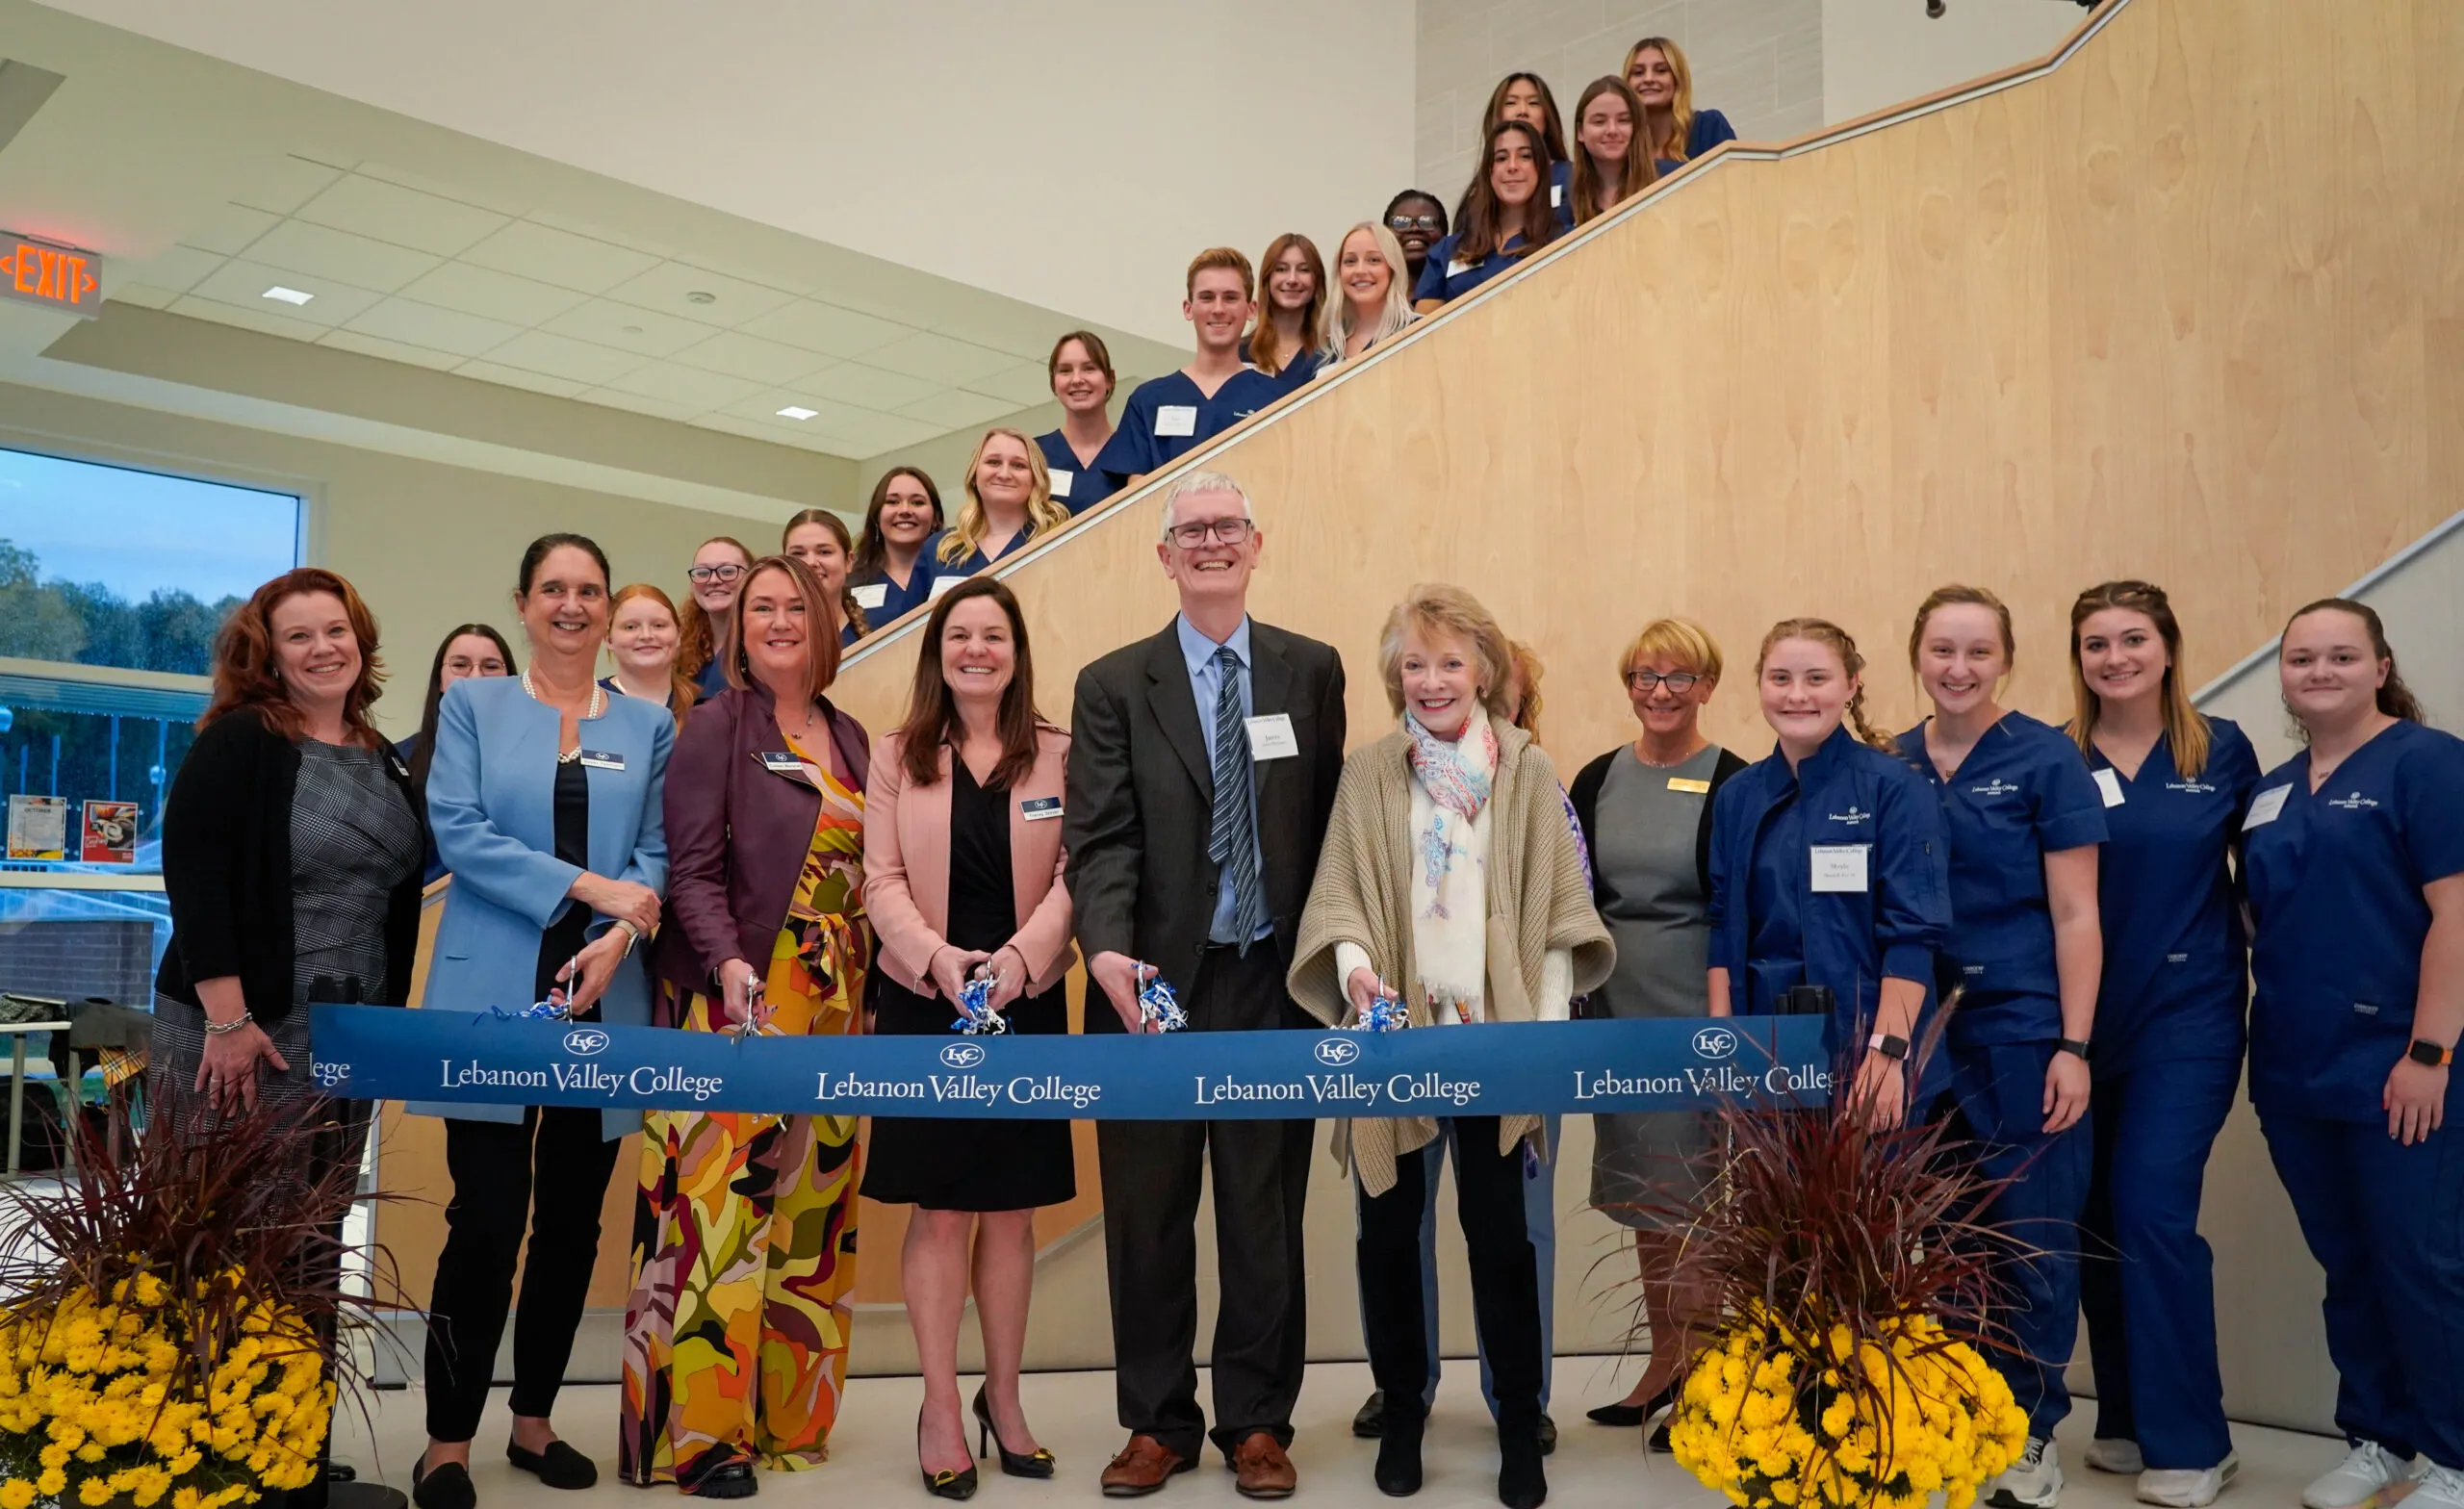 LVC President James MacLaren and staff cut ribbon in honor of new nursing facility.